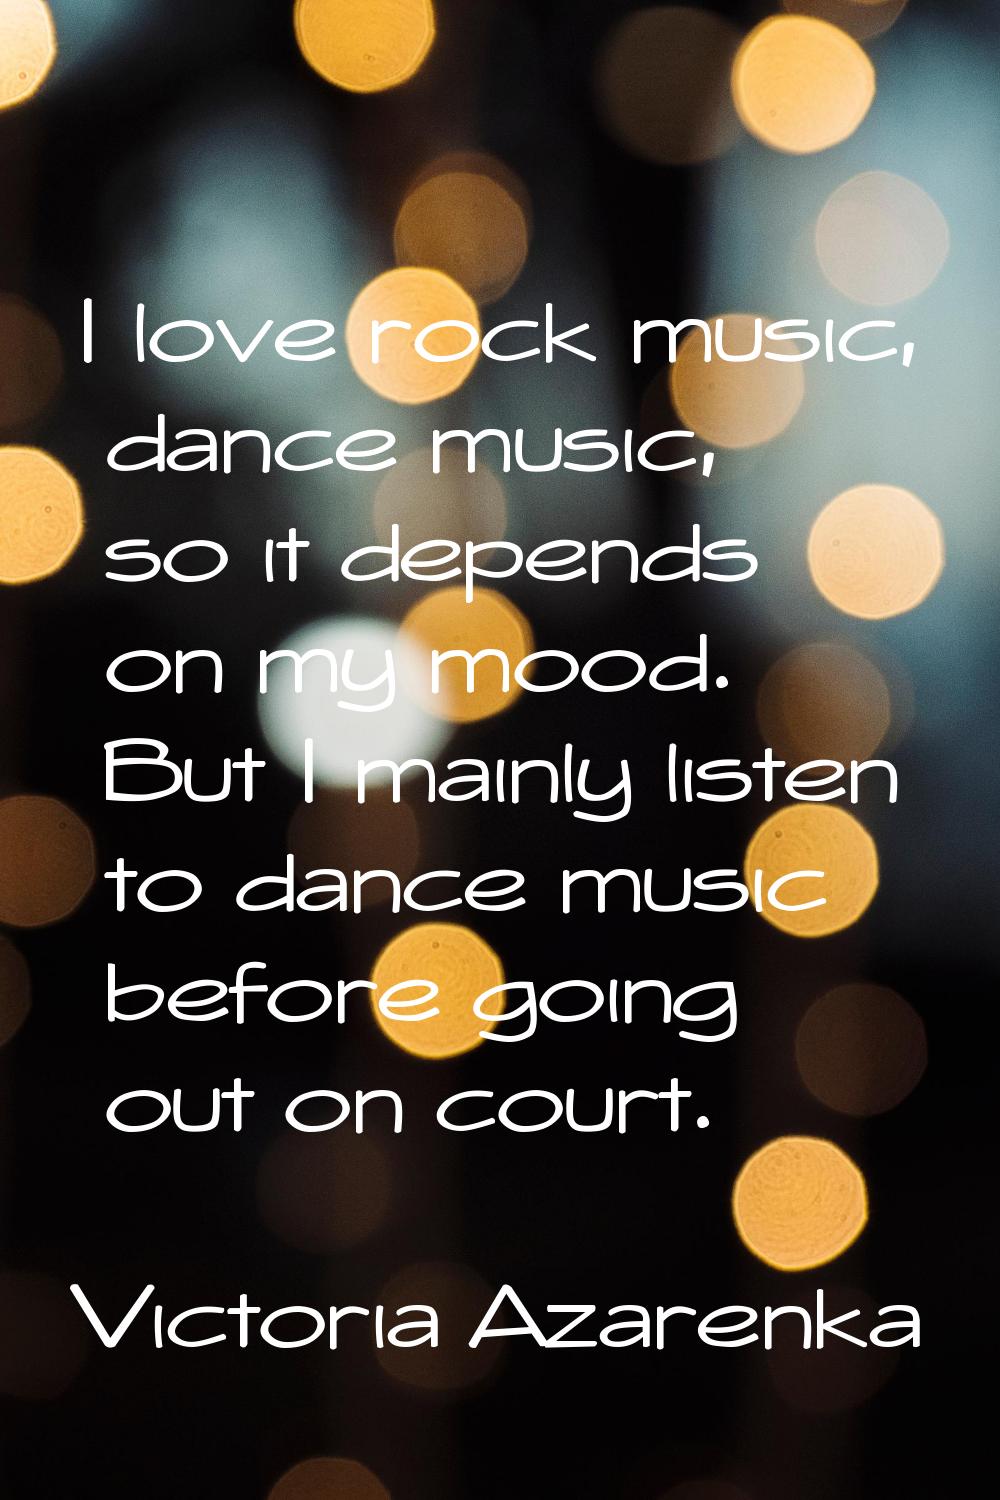 I love rock music, dance music, so it depends on my mood. But I mainly listen to dance music before